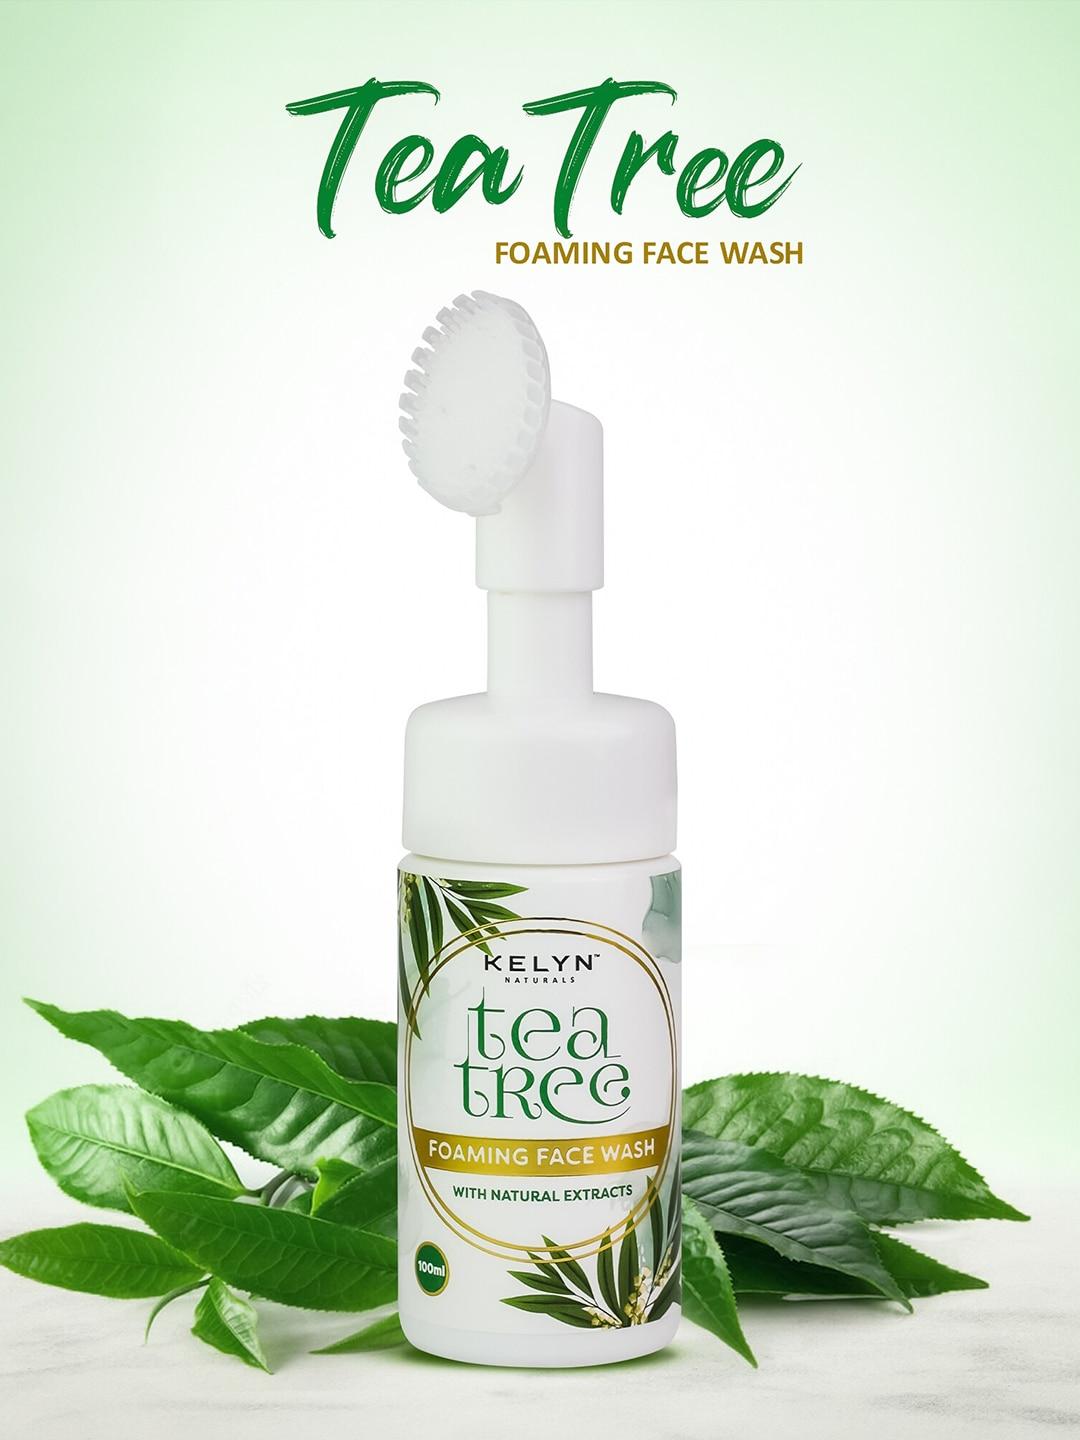 KELYN Set Of 2 Tea Tree Foaming Face Wash With Built-In Face Brush 100ml Each